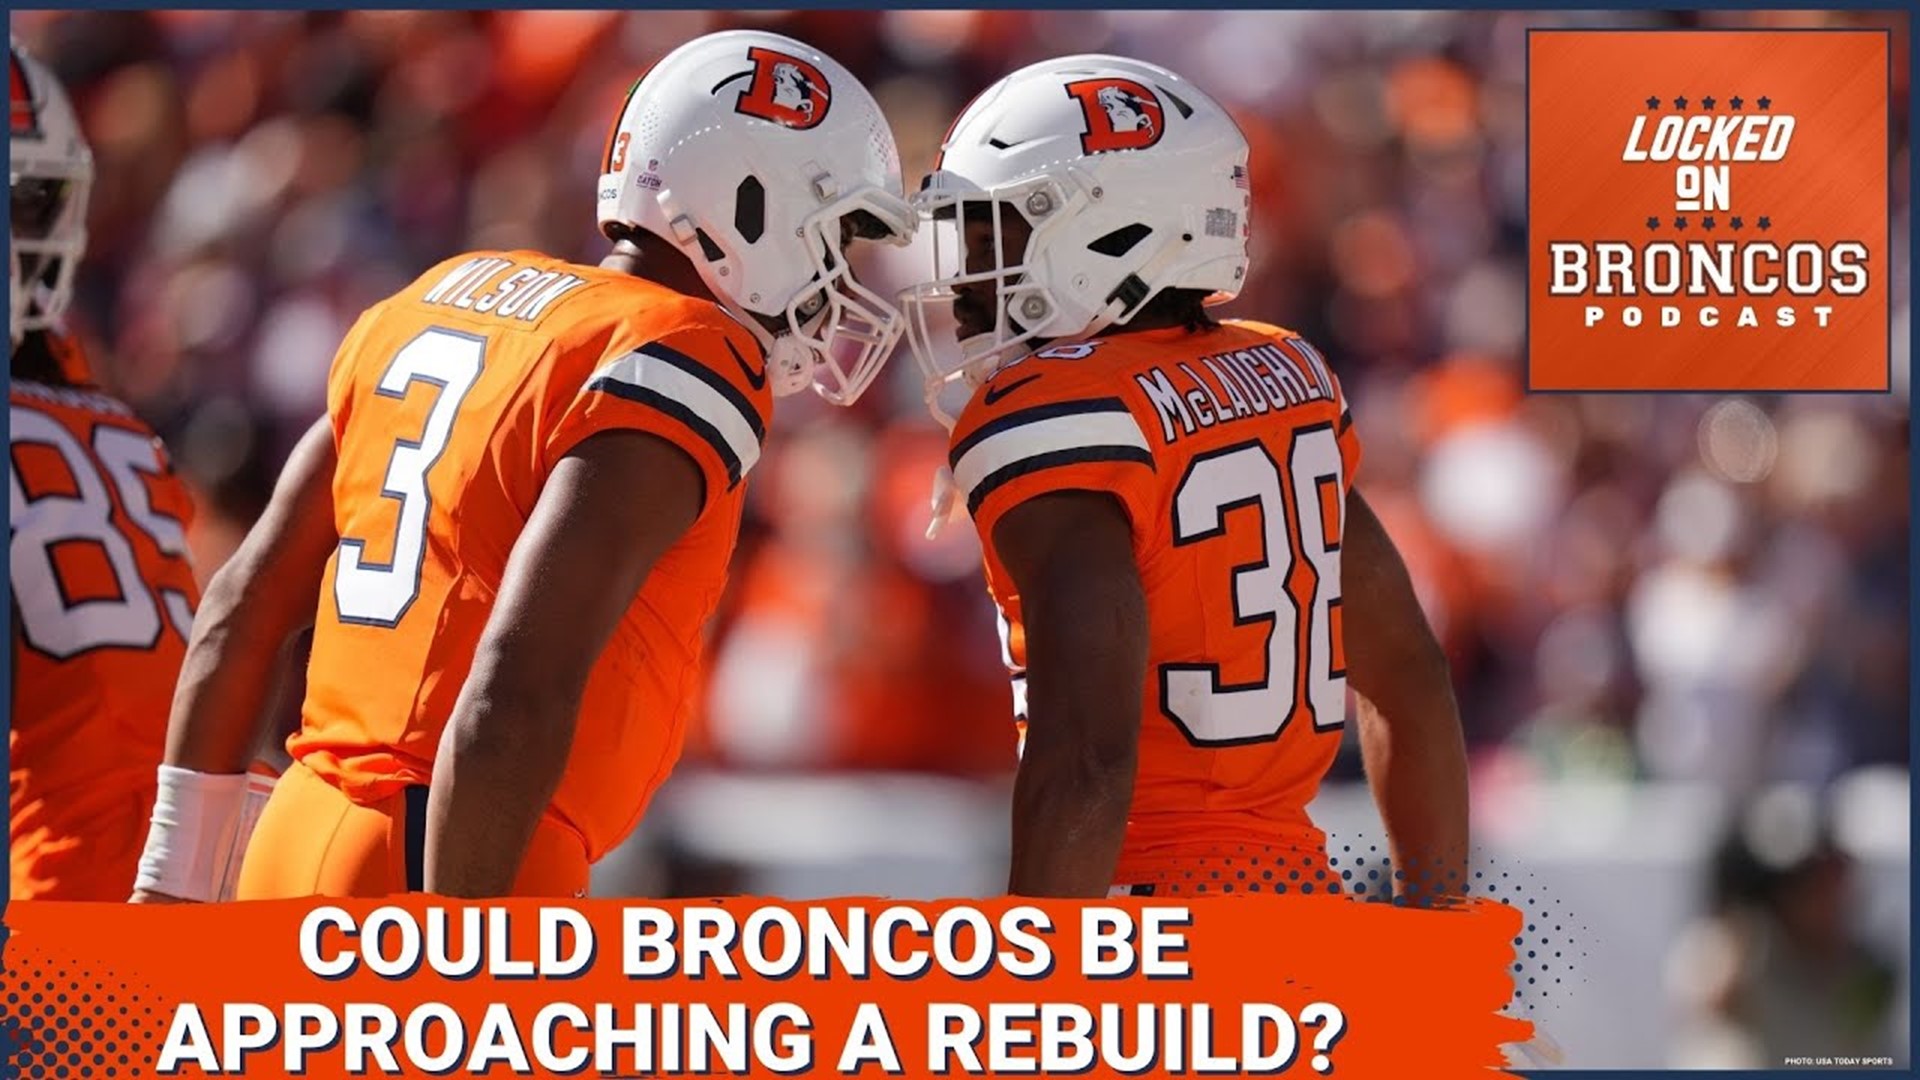 Can the Broncos rebuild with Russell Wilson as a core piece moving forward and if so, what would that look like?